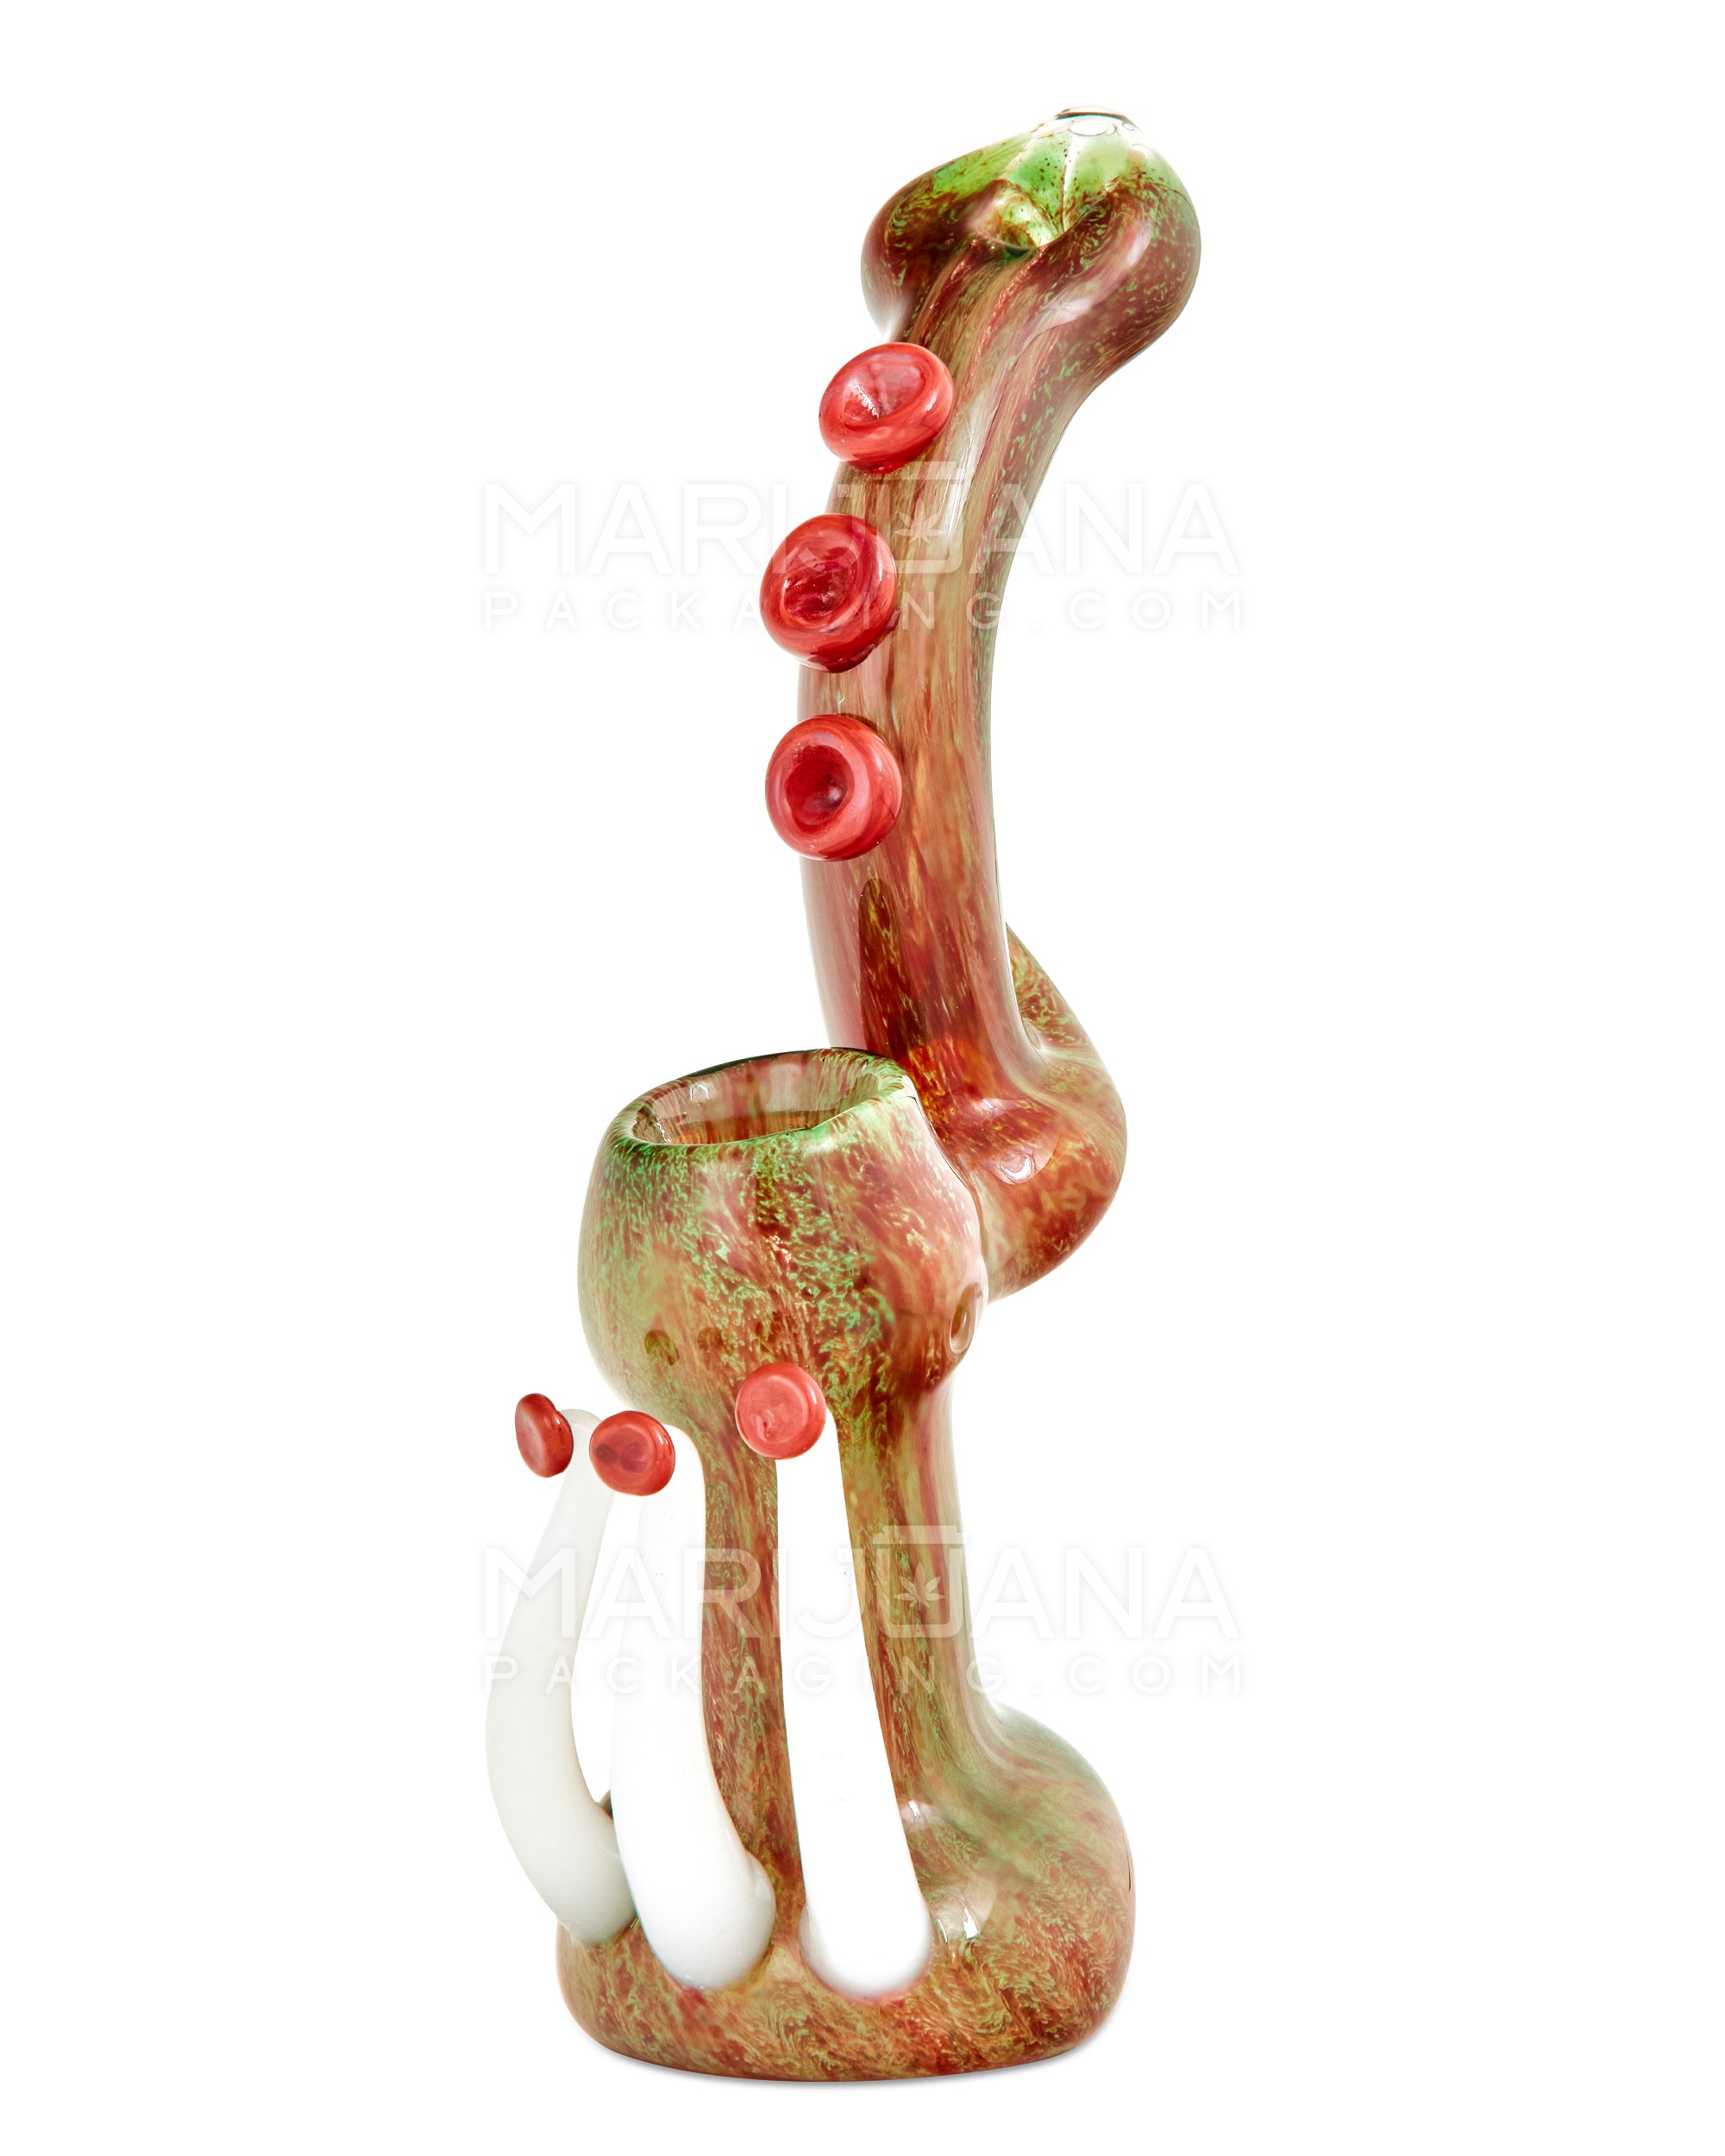 Heady | Donut Mouth Color Pull Kraken Bubbler w/ Triple Tentacles | 9in Tall - Glass - Red & Green - 3